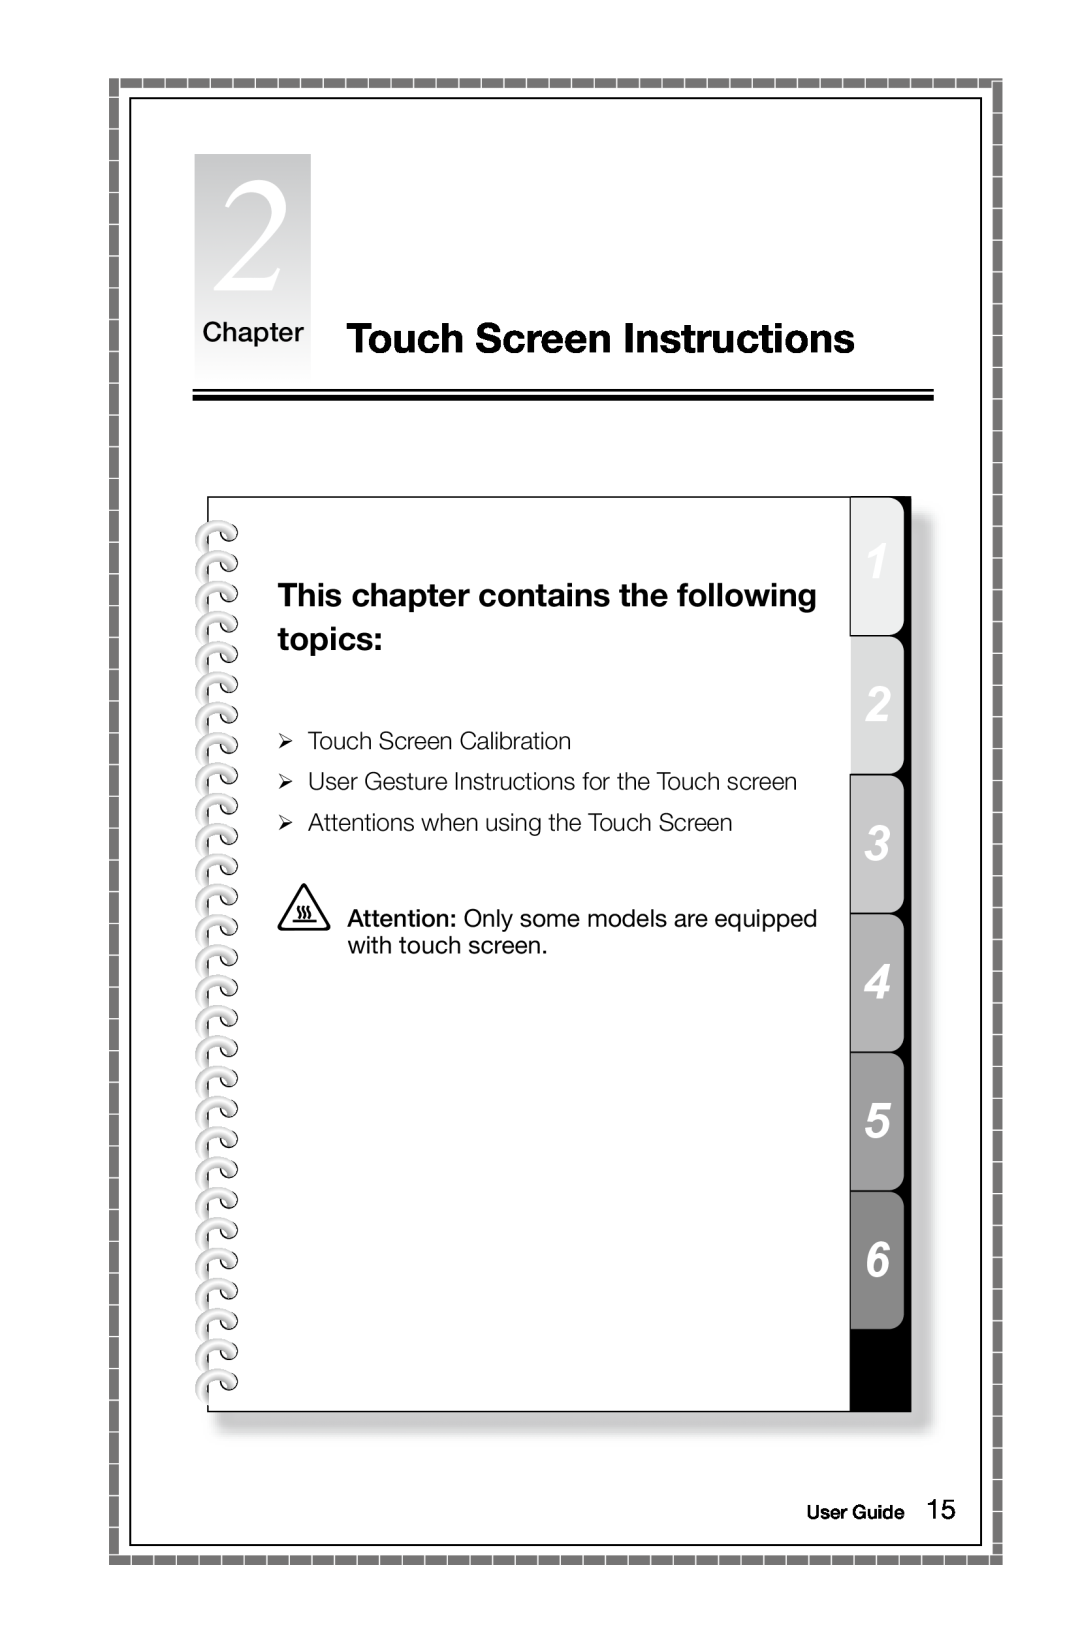 Lenovo 10052, B3 Chapter Touch Screen Instructions, This chapter contains the following topics, Ø Touch Screen Calibration 